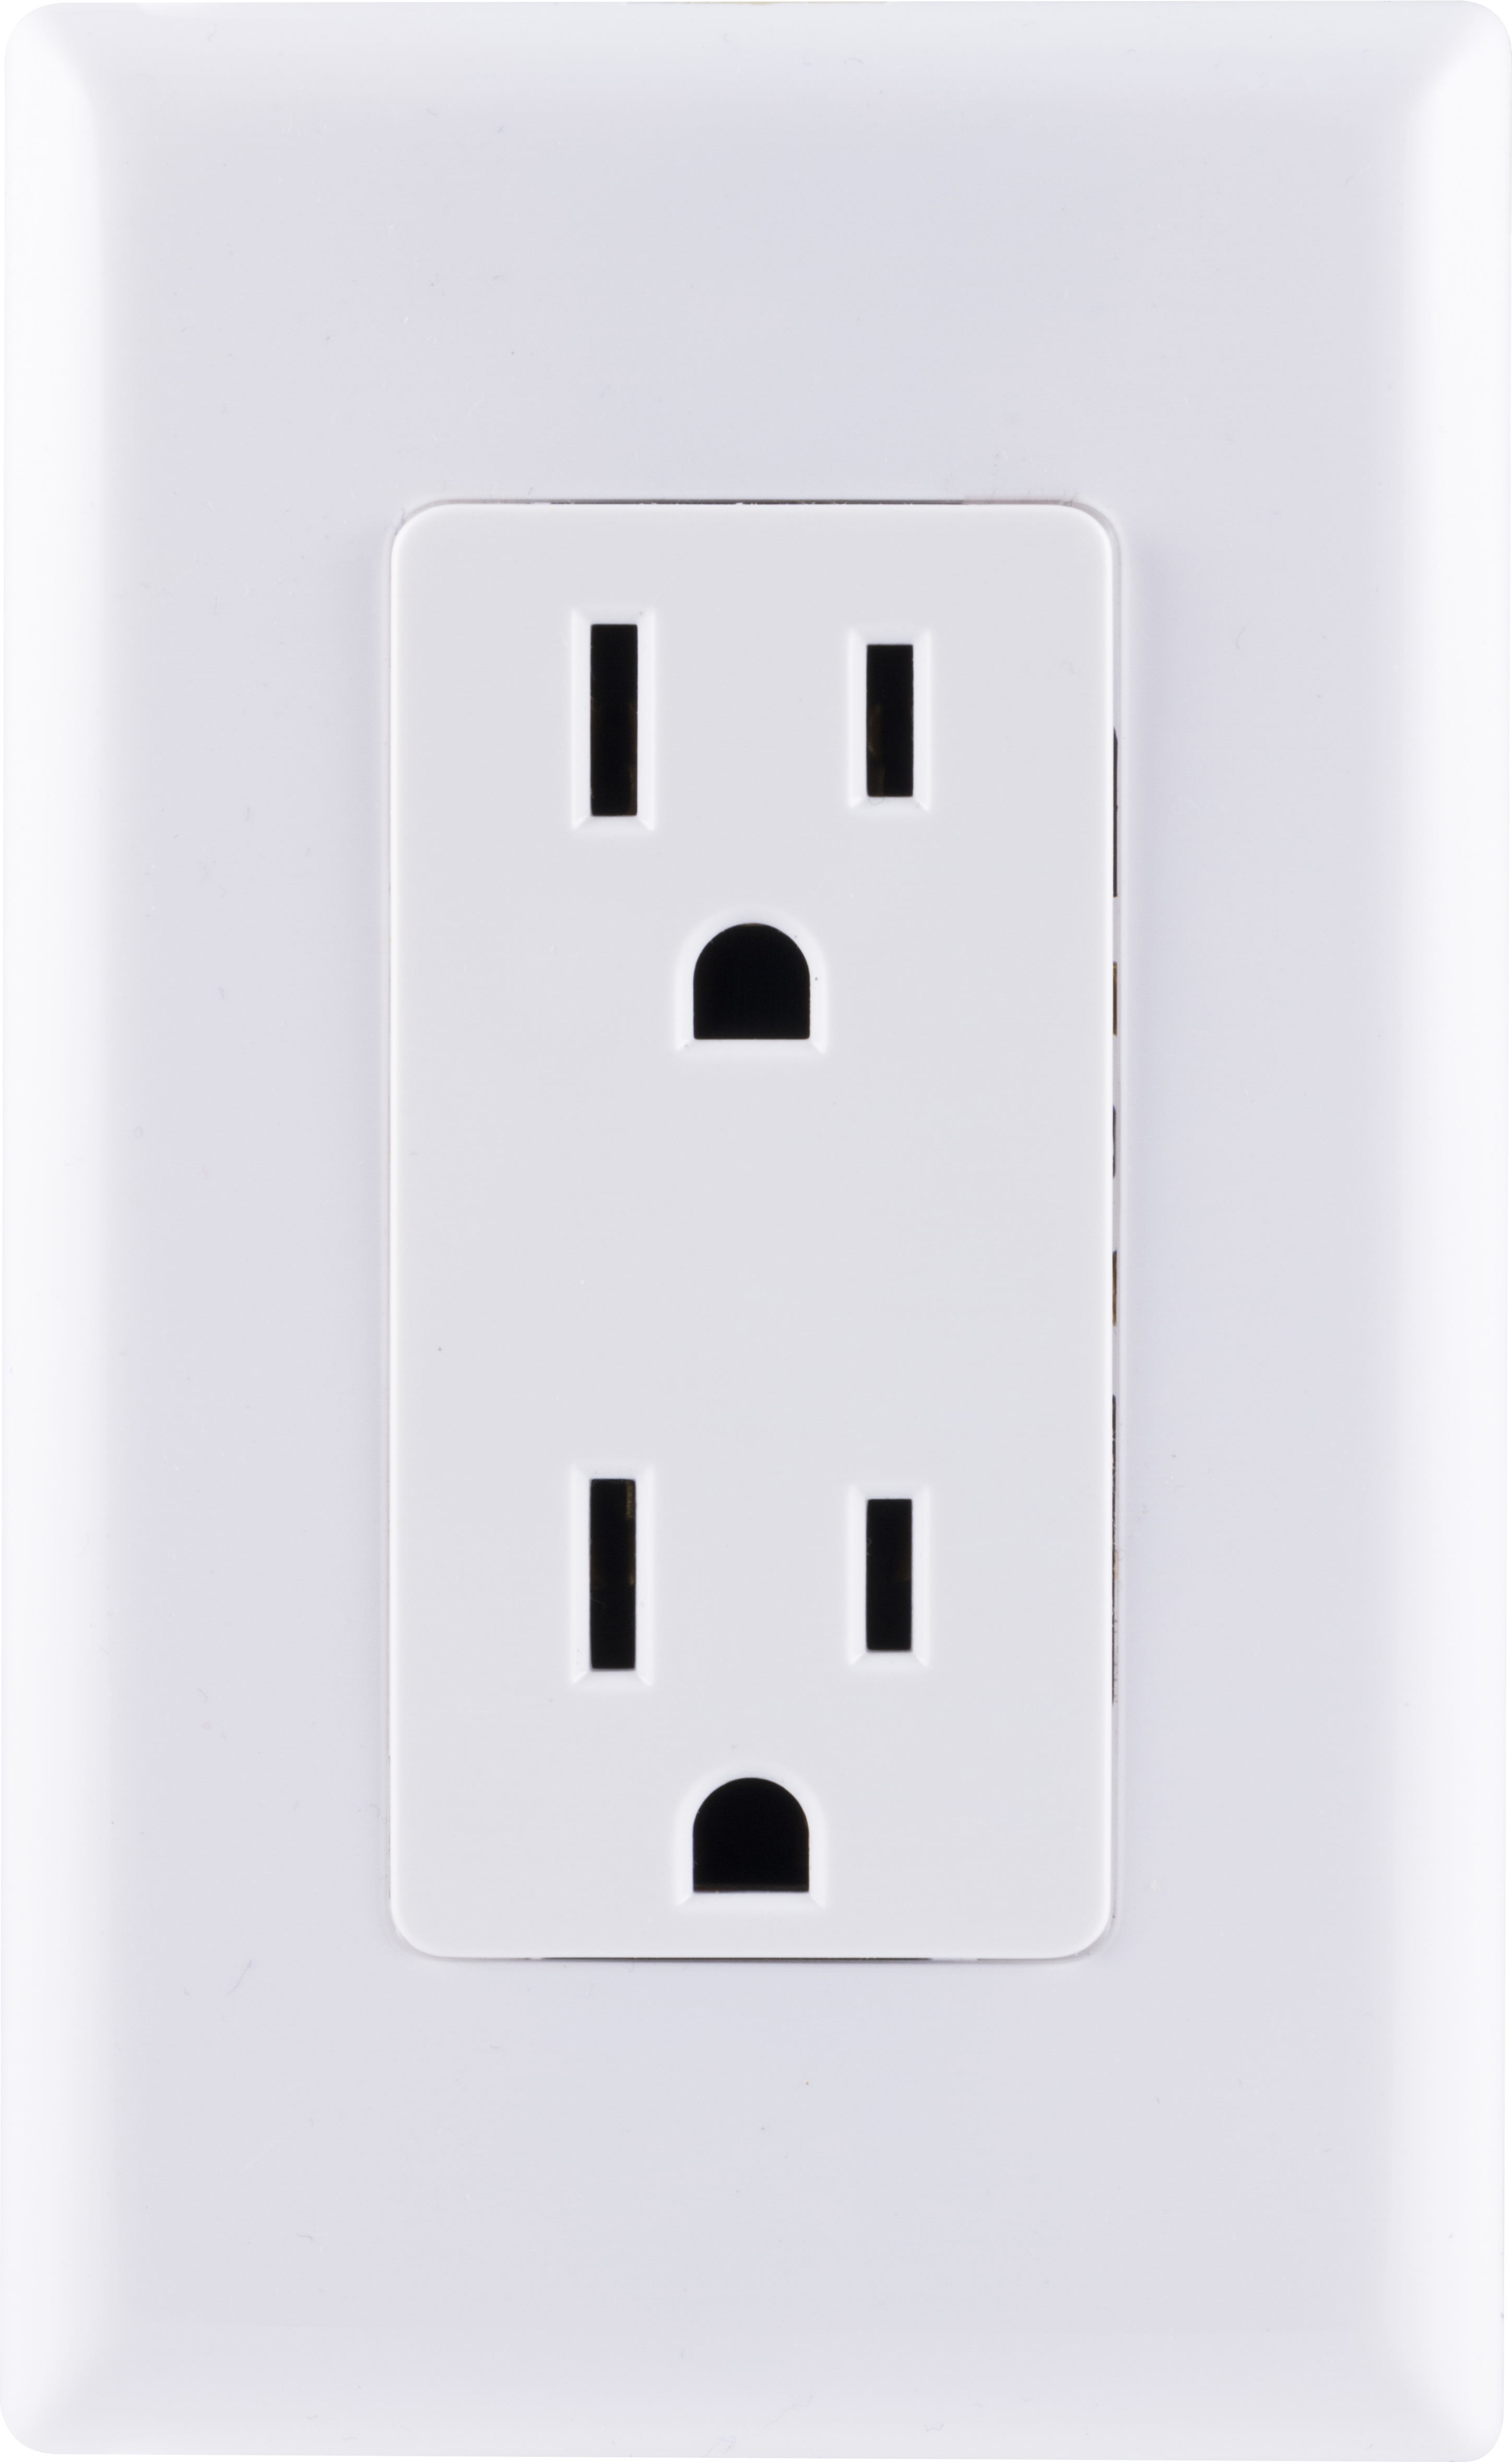 GE Grounding Designer Duplex Electrical Outlet, White 15A - 50727 - image 5 of 5